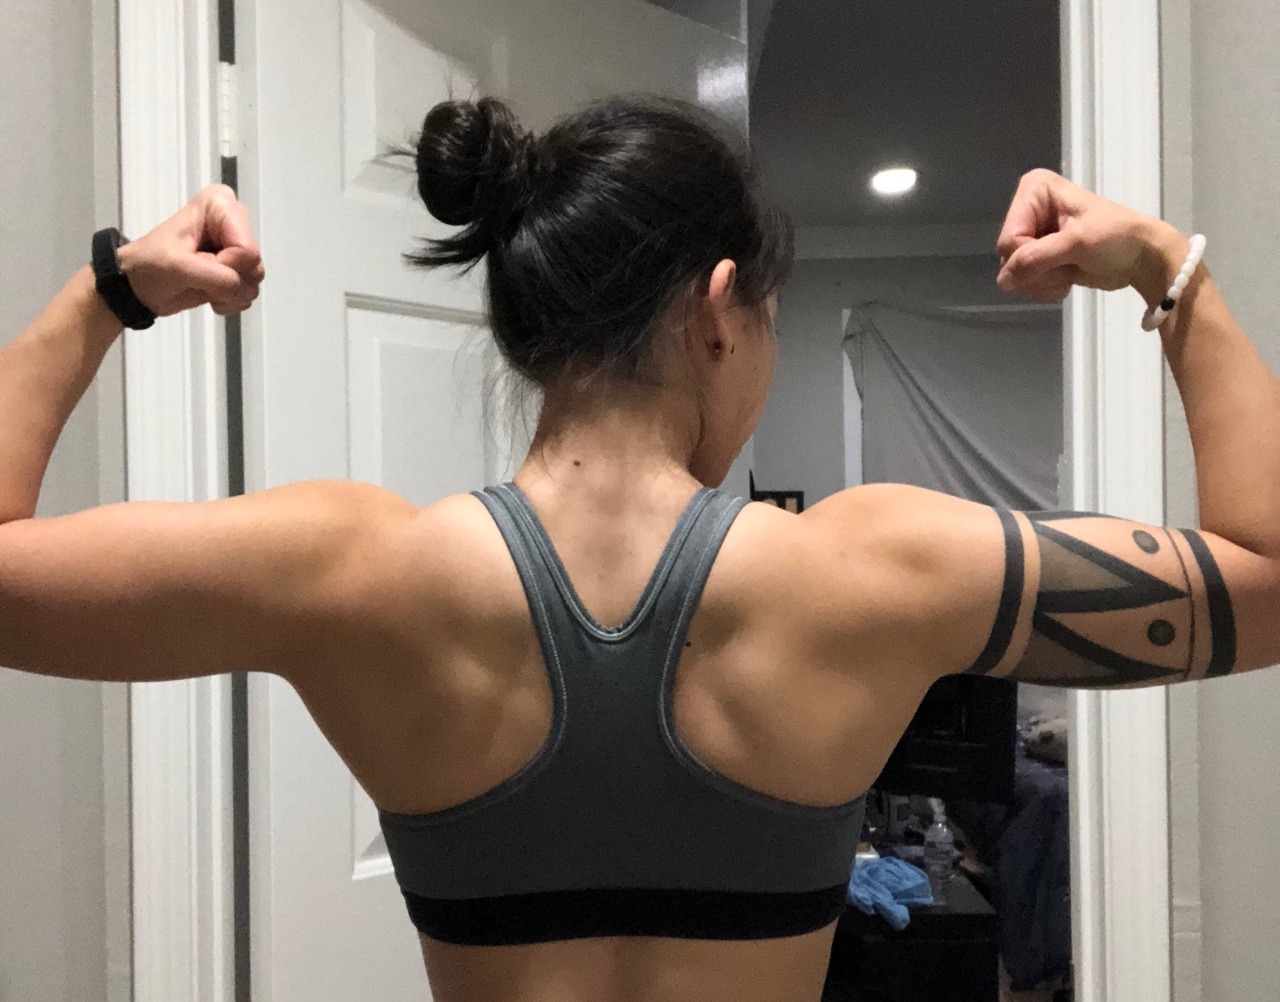 korrafitness: Flex Friday! Fuhsique! Currently in a bulking phase trying to focus